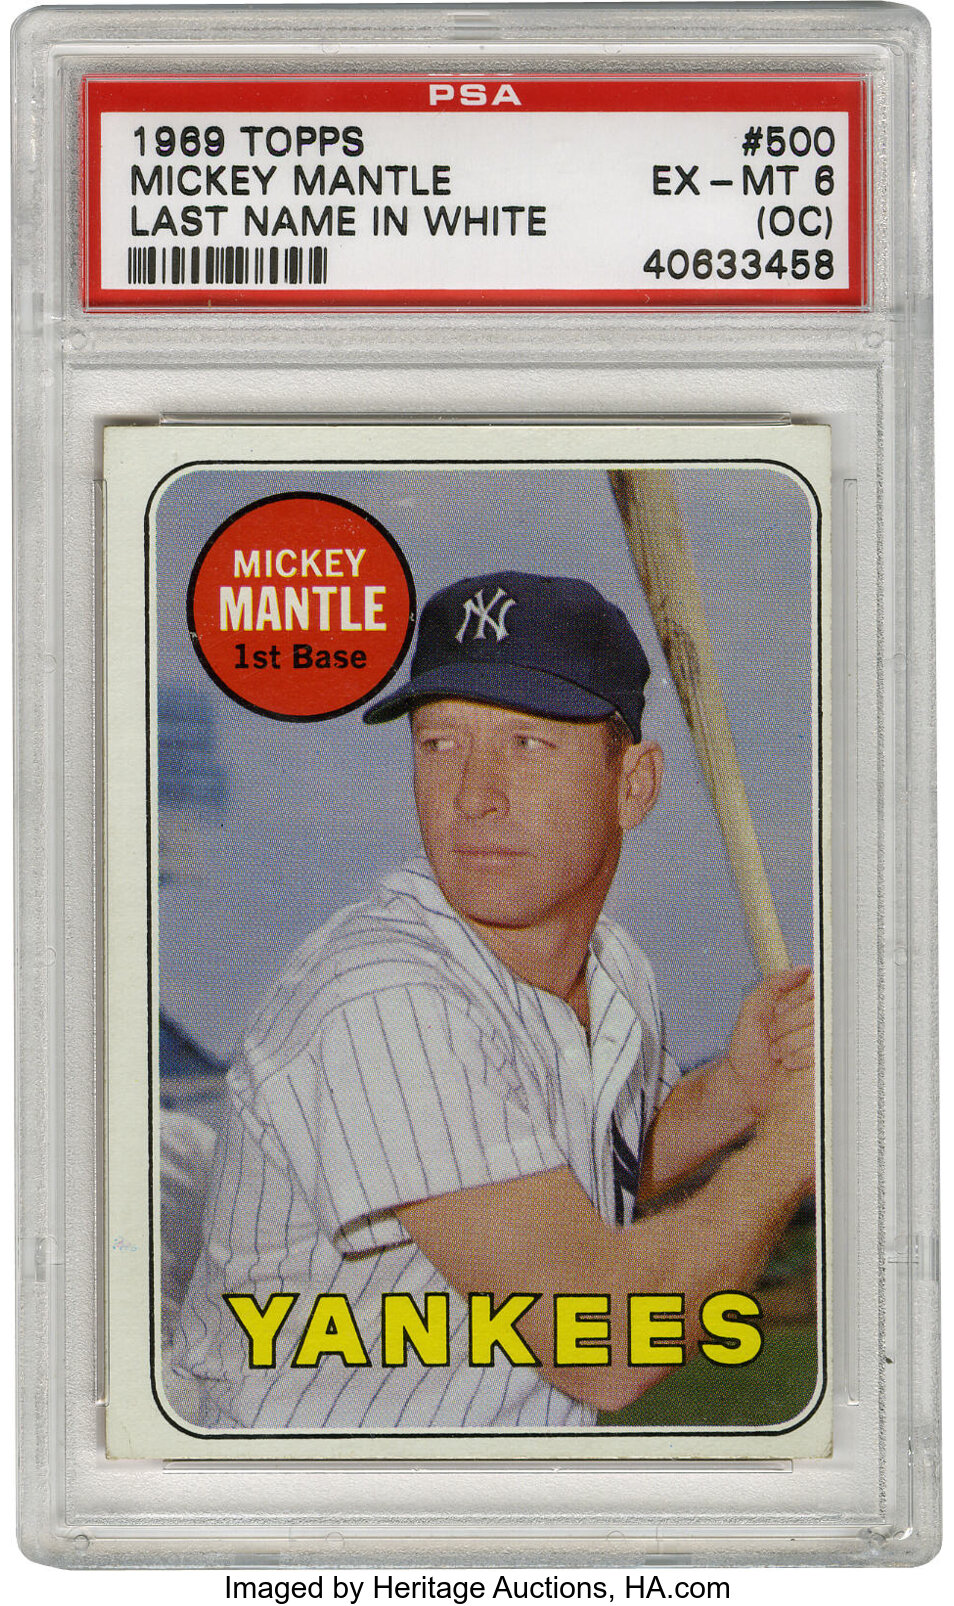 1969 Topps Mickey Mantle Last Name in White #500 PSA EX-MT 6 (OC)., Lot  #62010